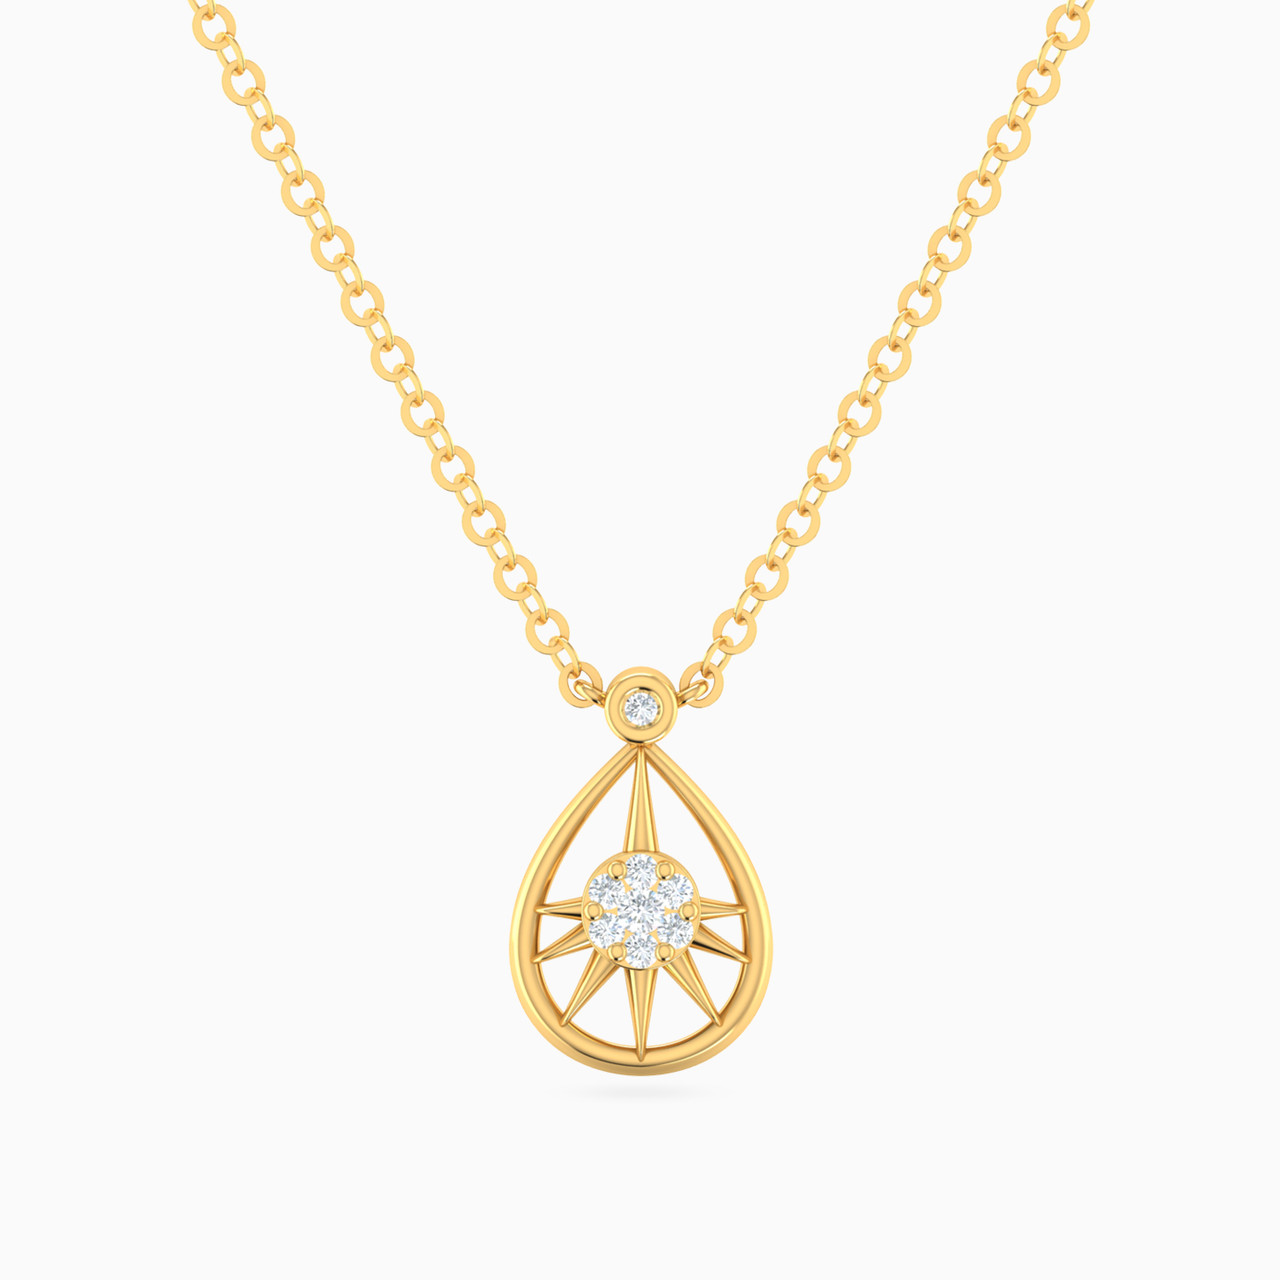 Pear Shaped Diamond Pendant Necklace with 18K Gold Chain